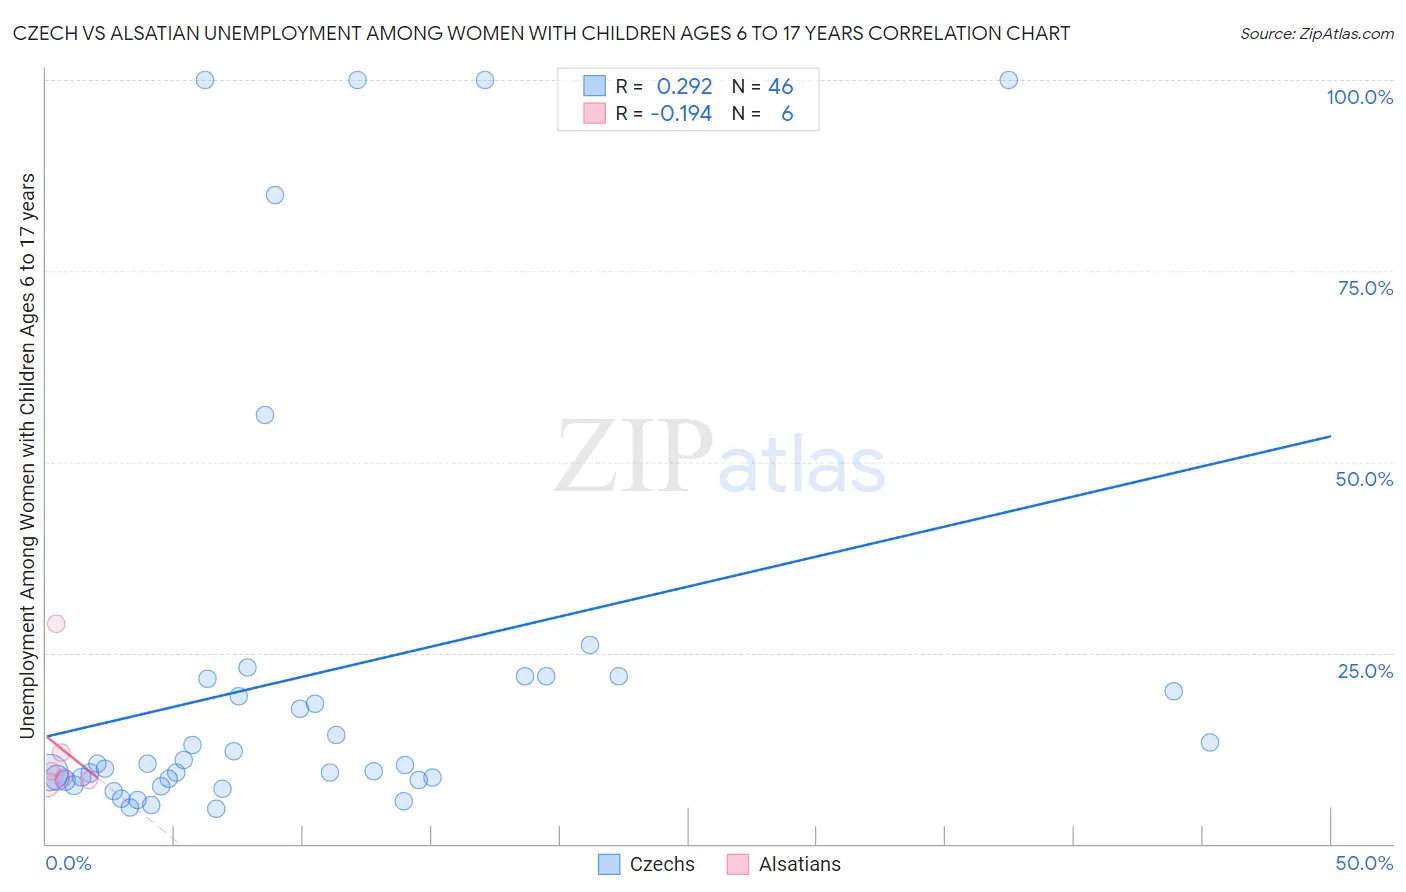 Czech vs Alsatian Unemployment Among Women with Children Ages 6 to 17 years